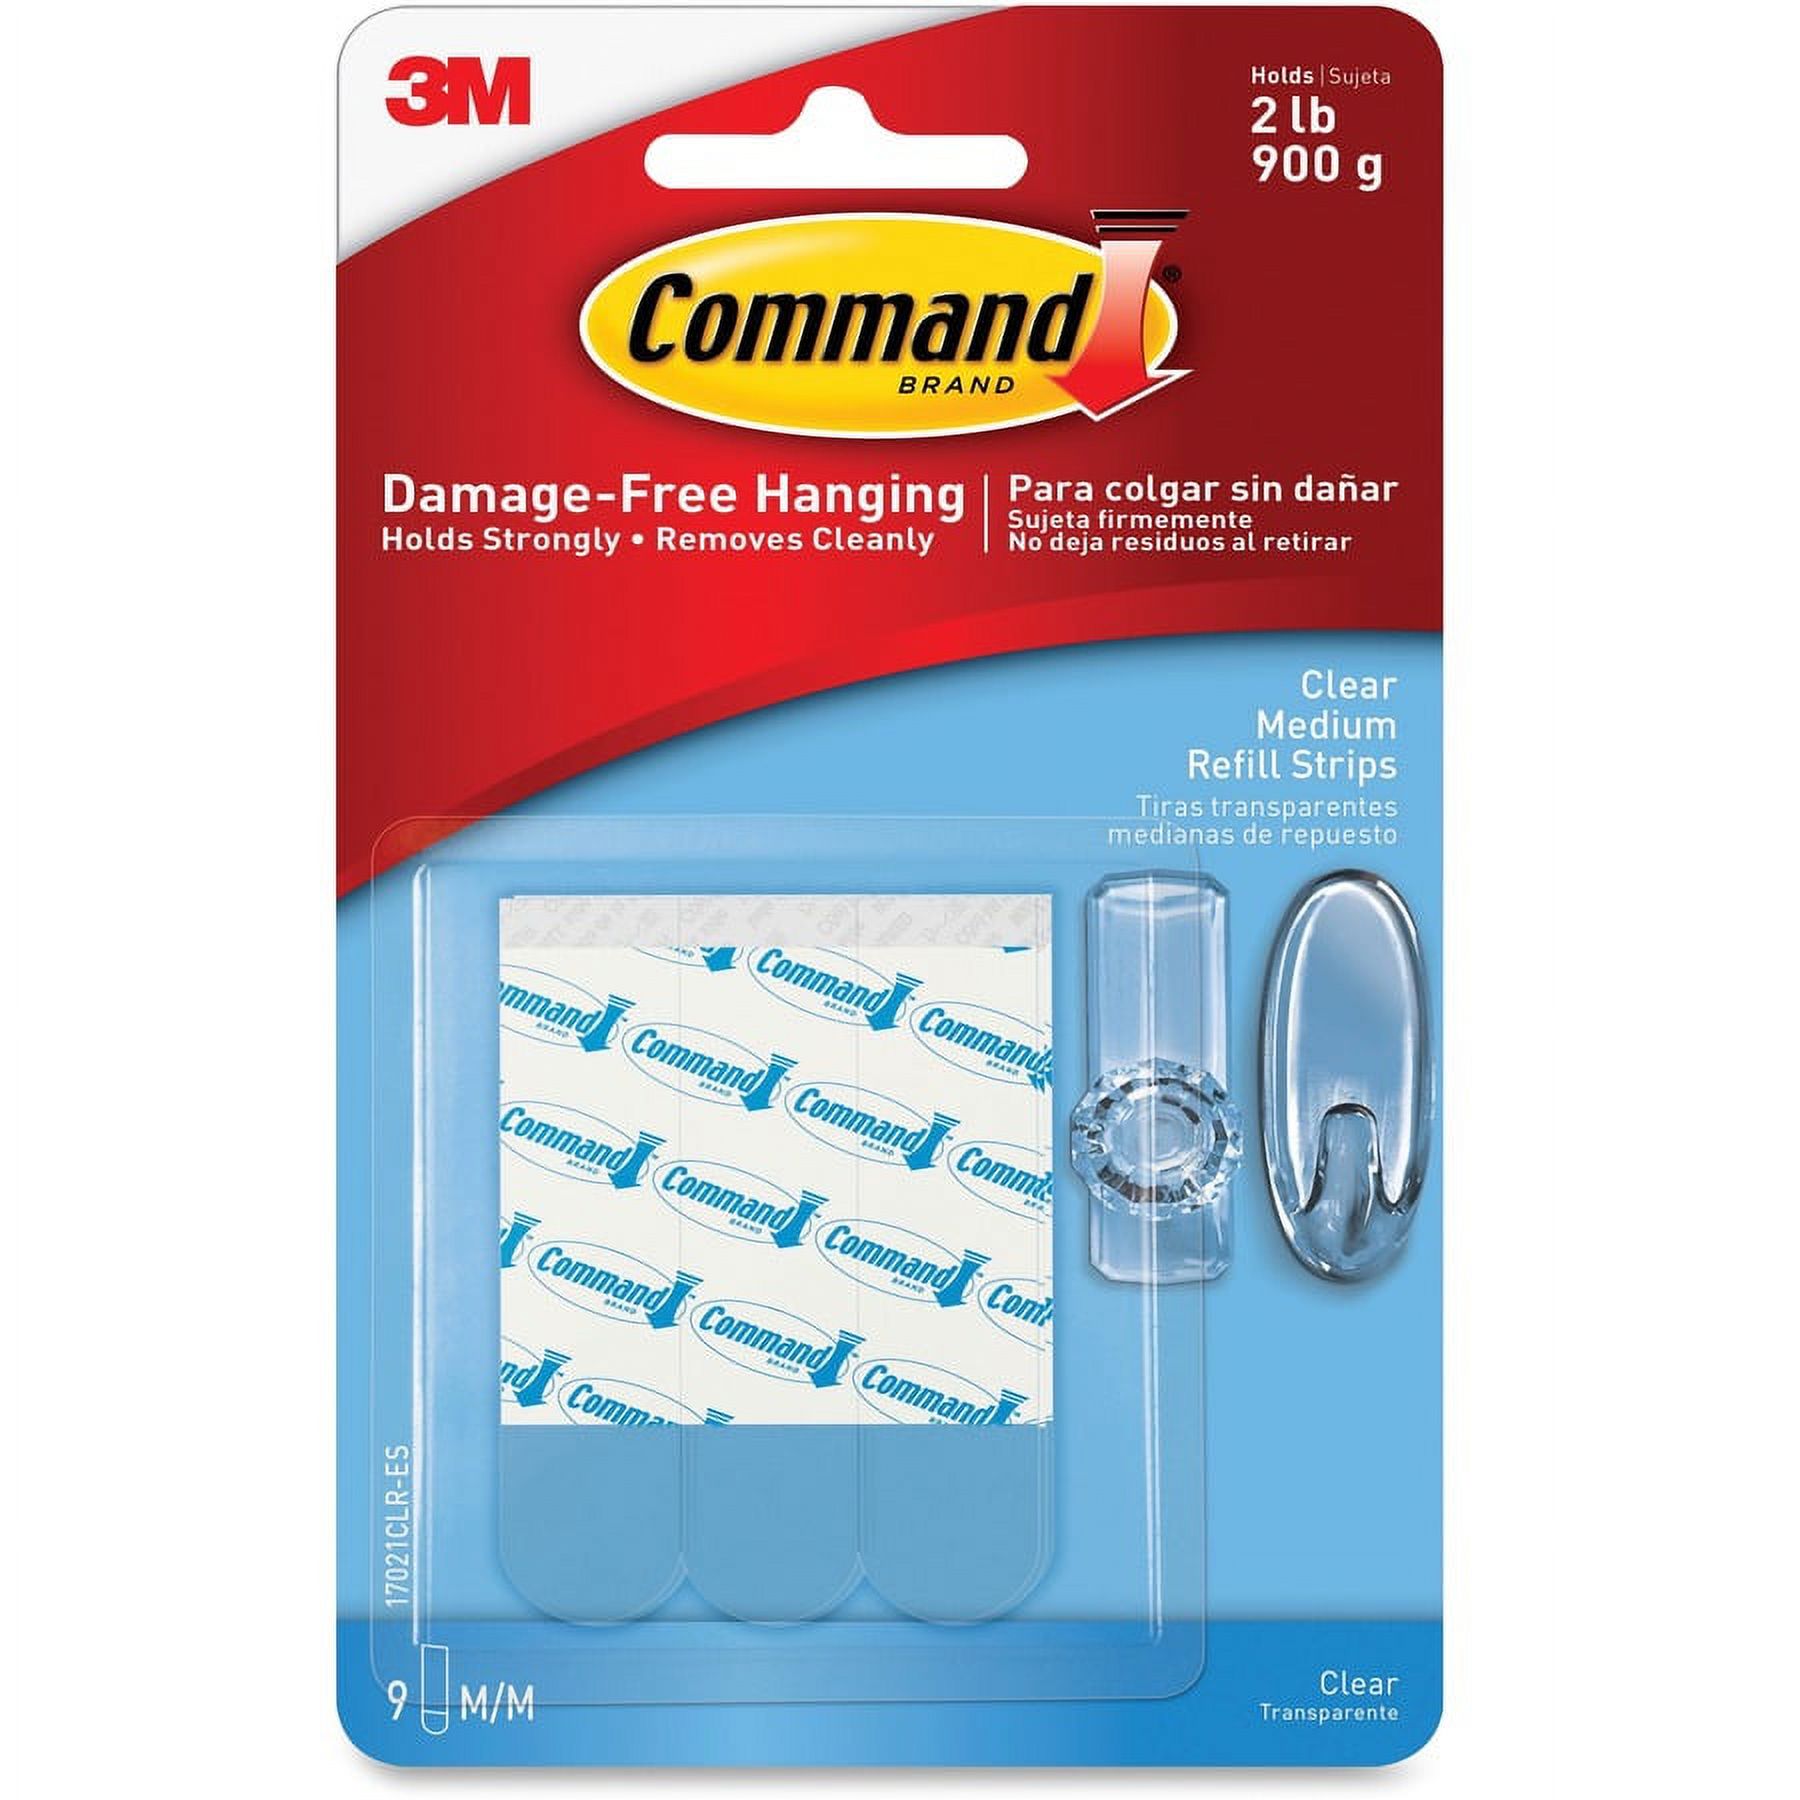 Command, MMM17021CLR, Clear Medium Refill Strips, 9 Roll, Clear - image 1 of 2